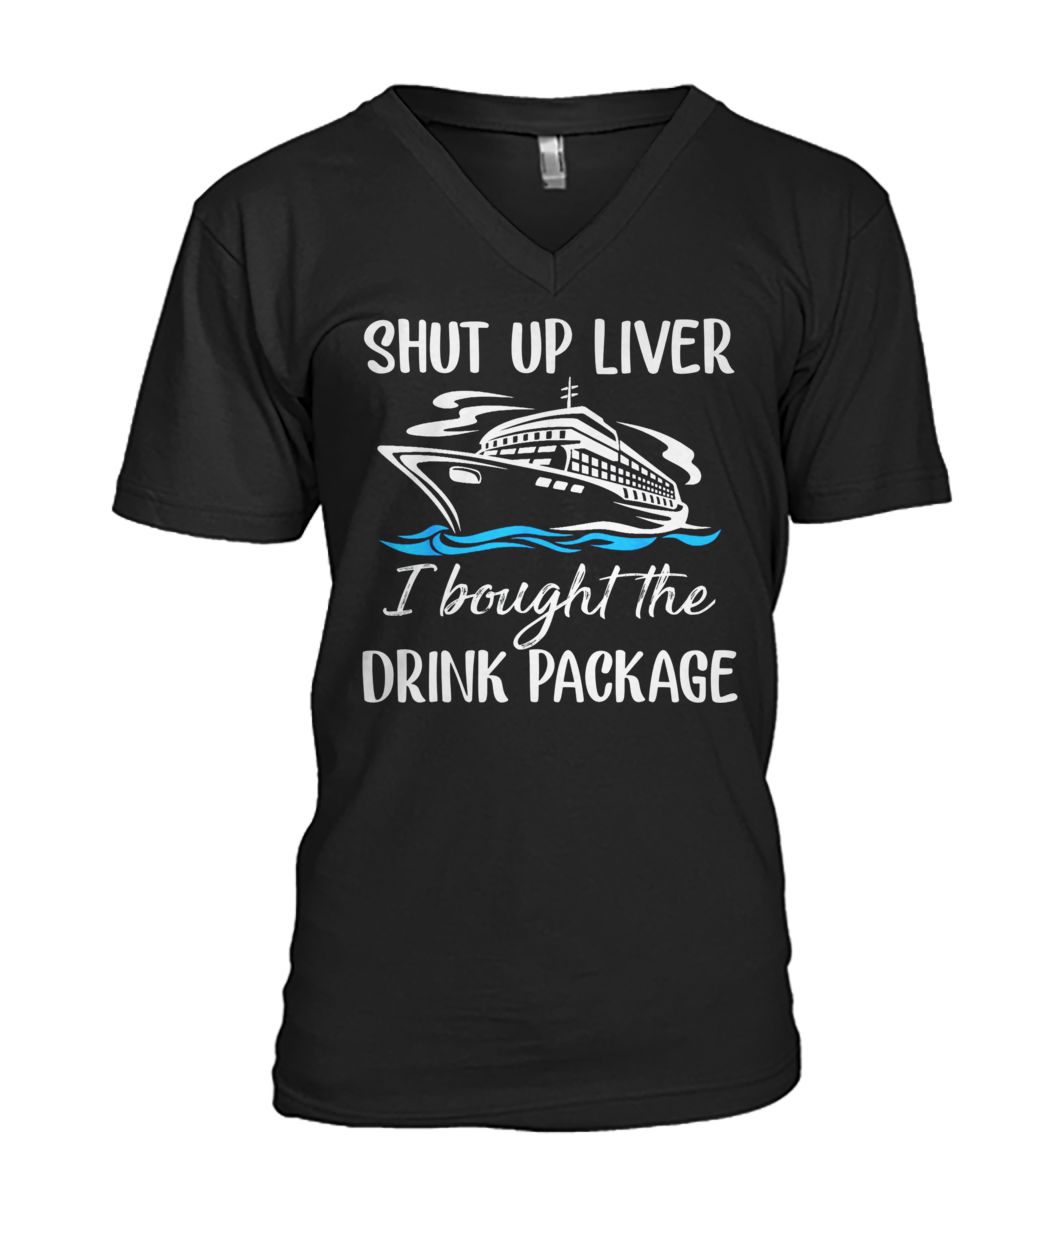 Cruise shut up liver I bought the drink package mens v-neck